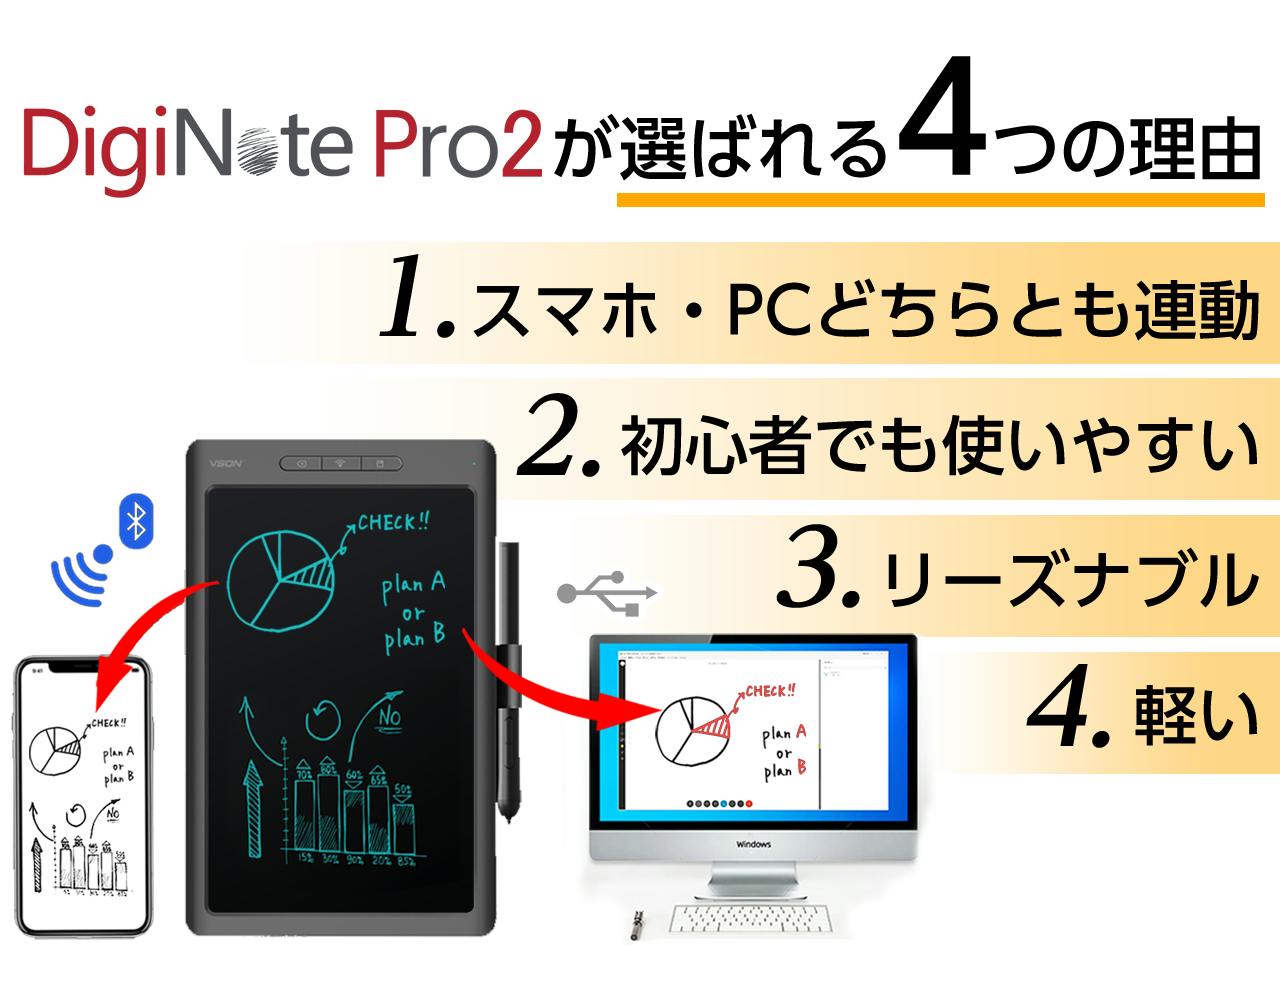 dignote pro2